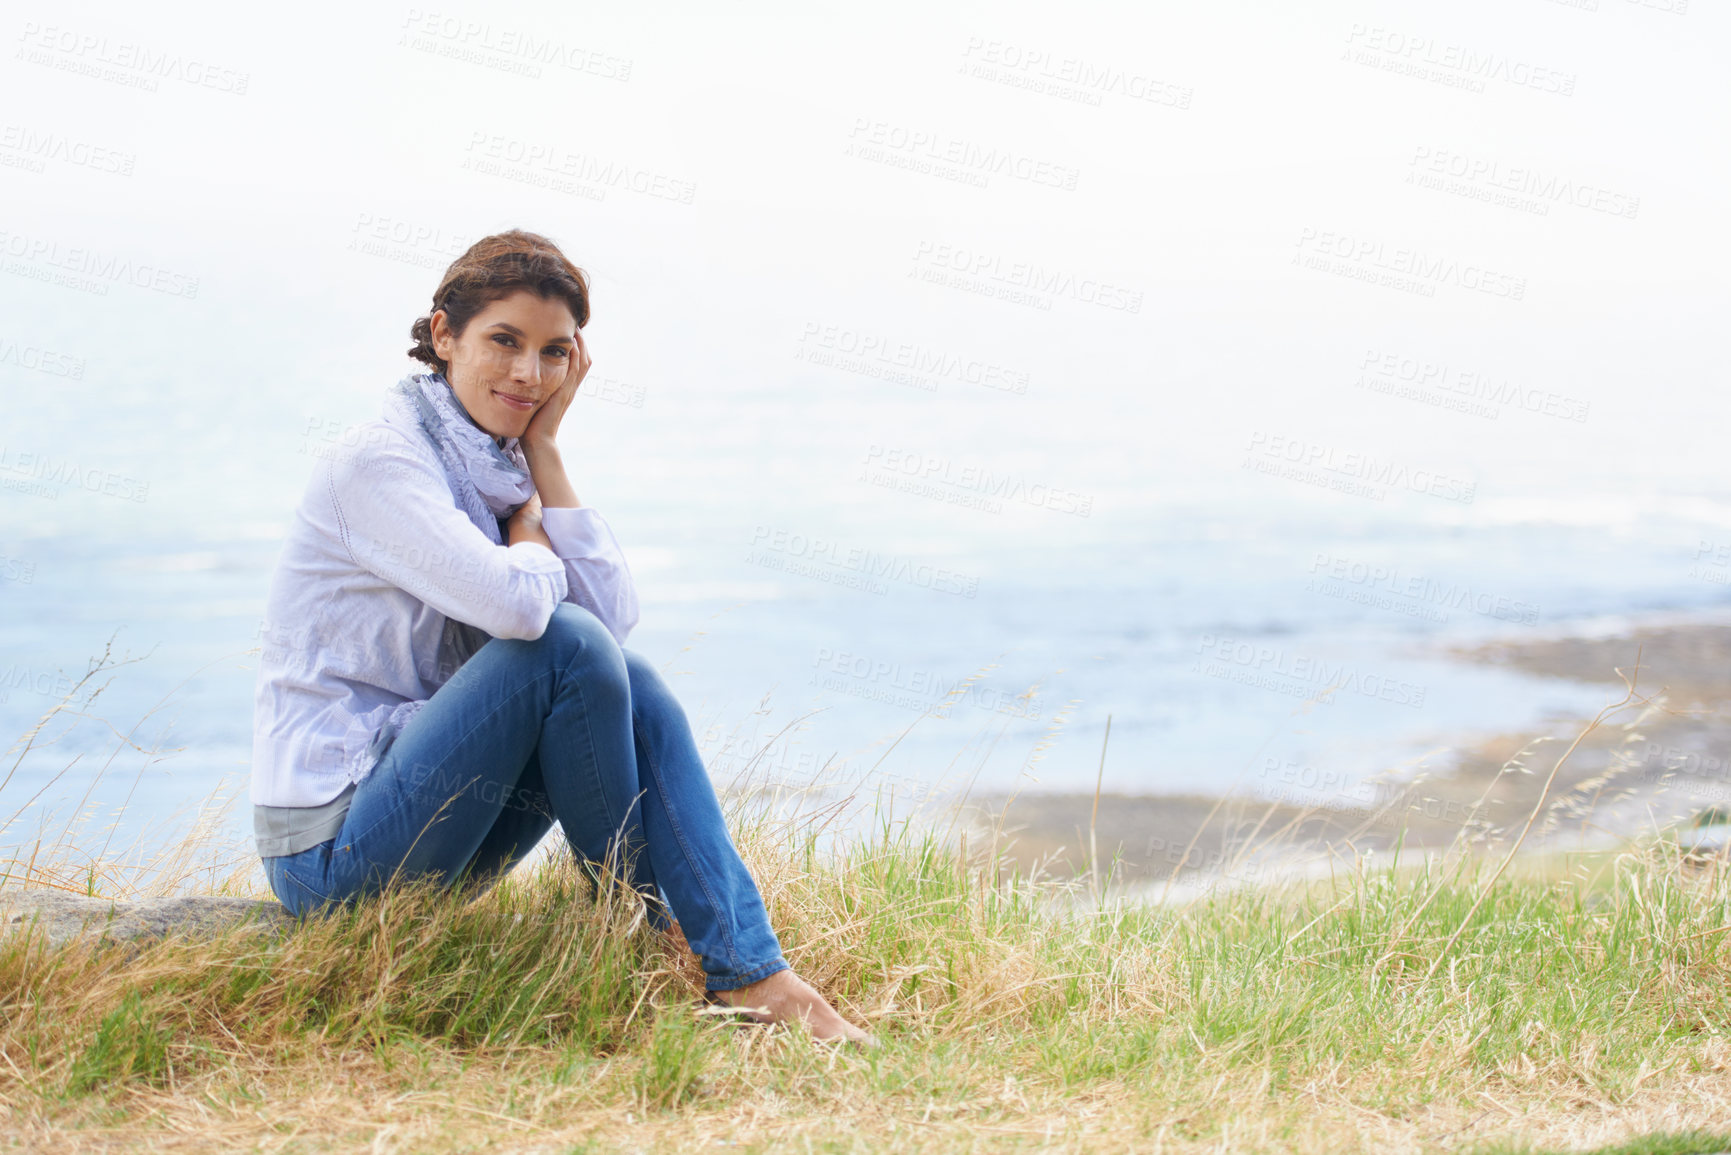 Buy stock photo Portrait of a mature woman taking a break from her walk to take in the scenery